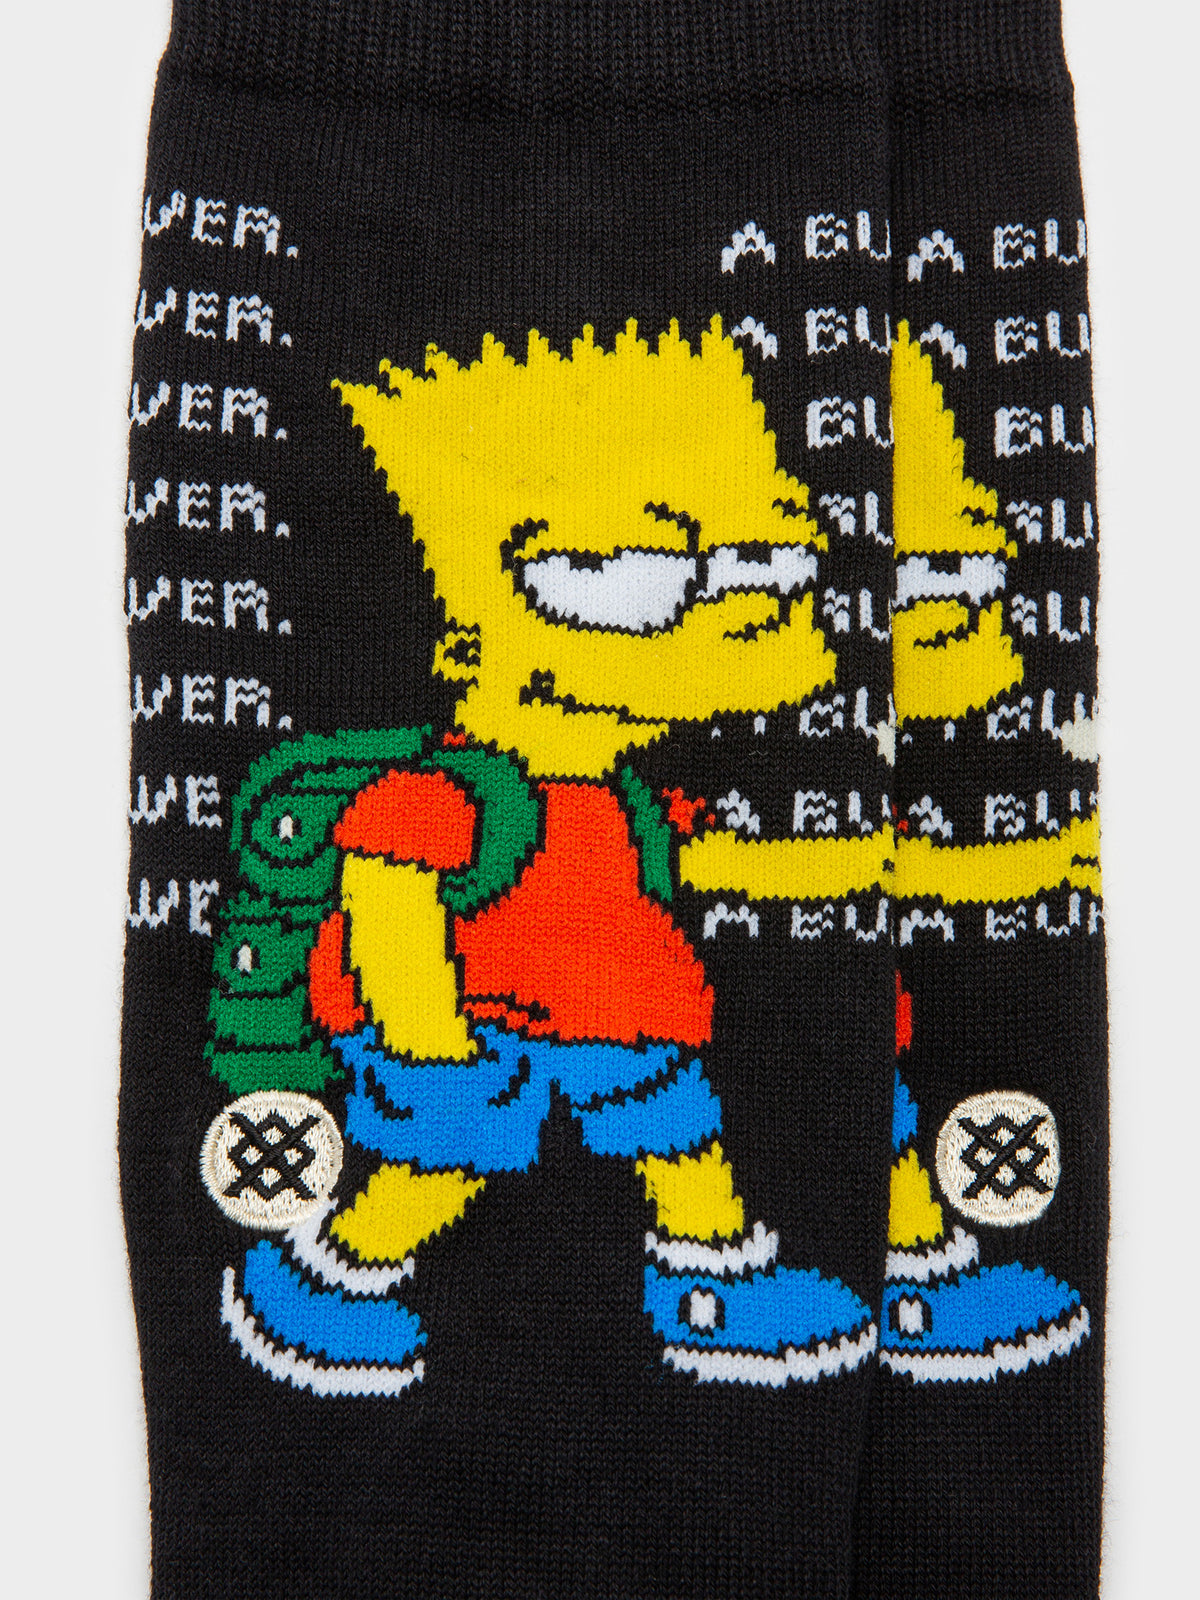 One Pair of The Simpsons Bart Troubled Socks